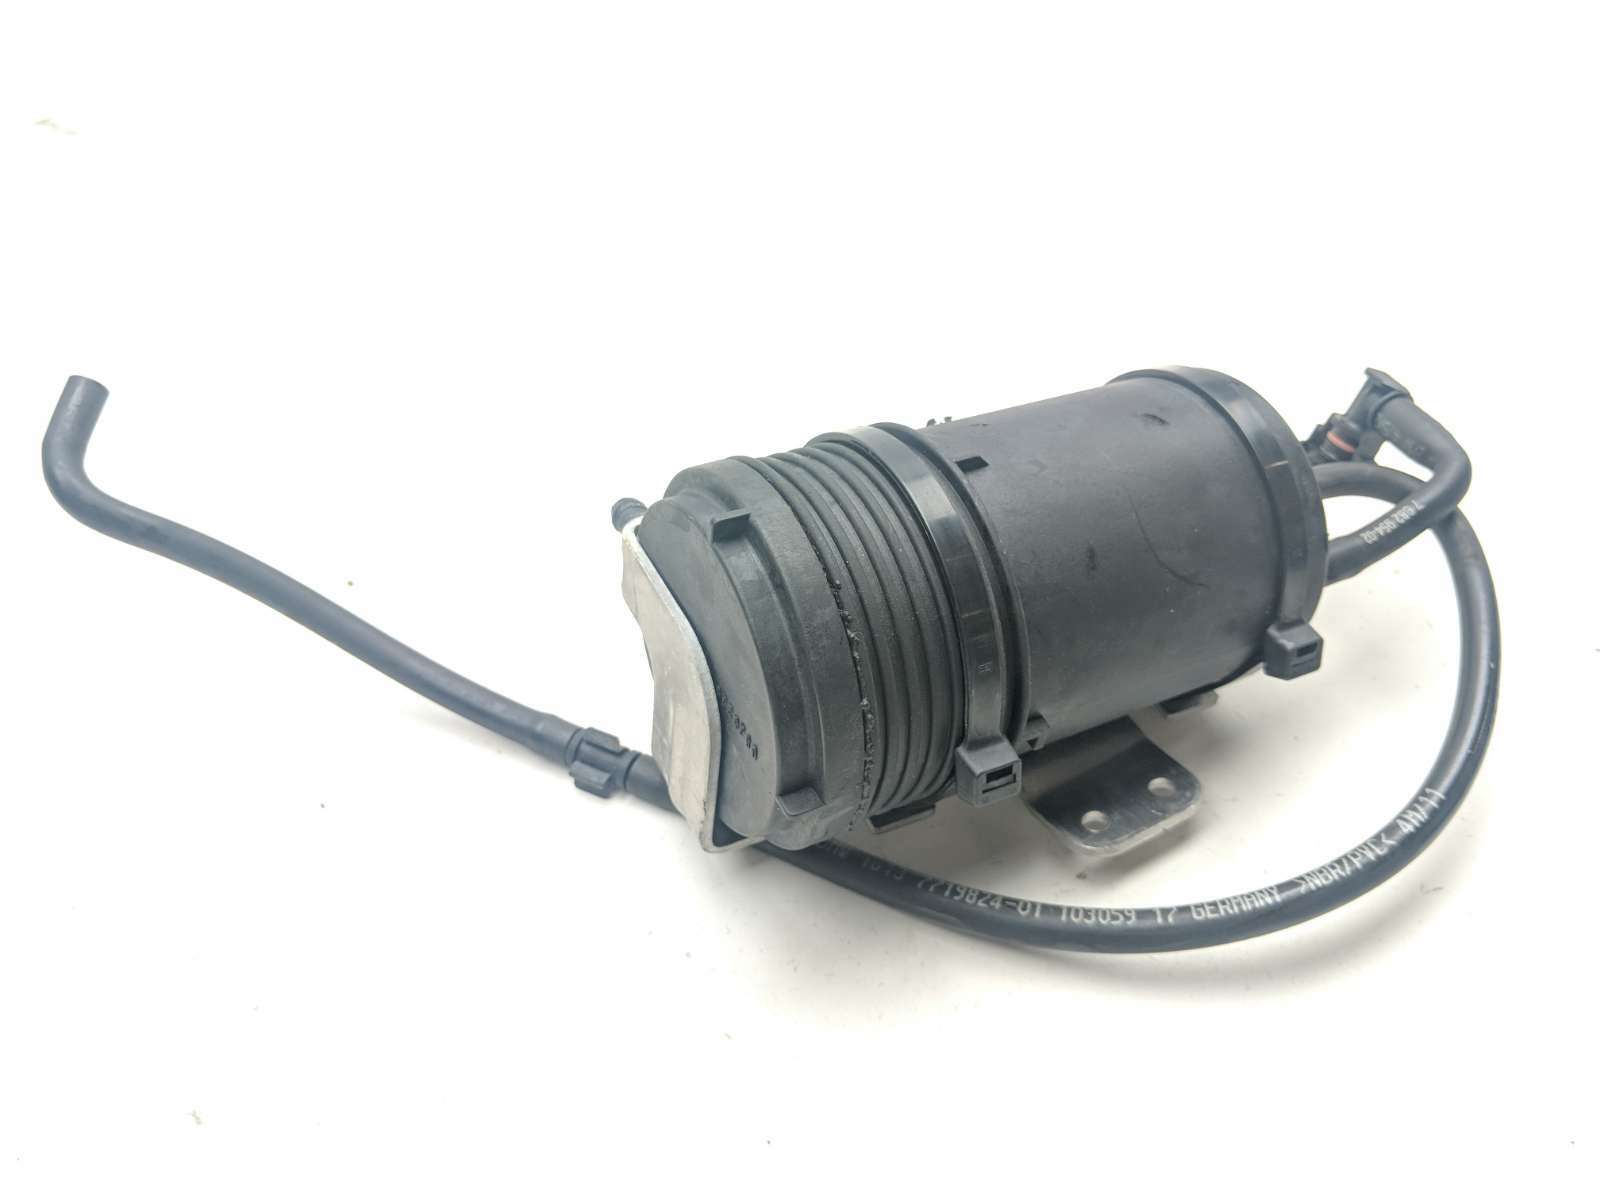 12 BMW R 1200 RT EVAP Emissions Can Canister Vacuum Pump